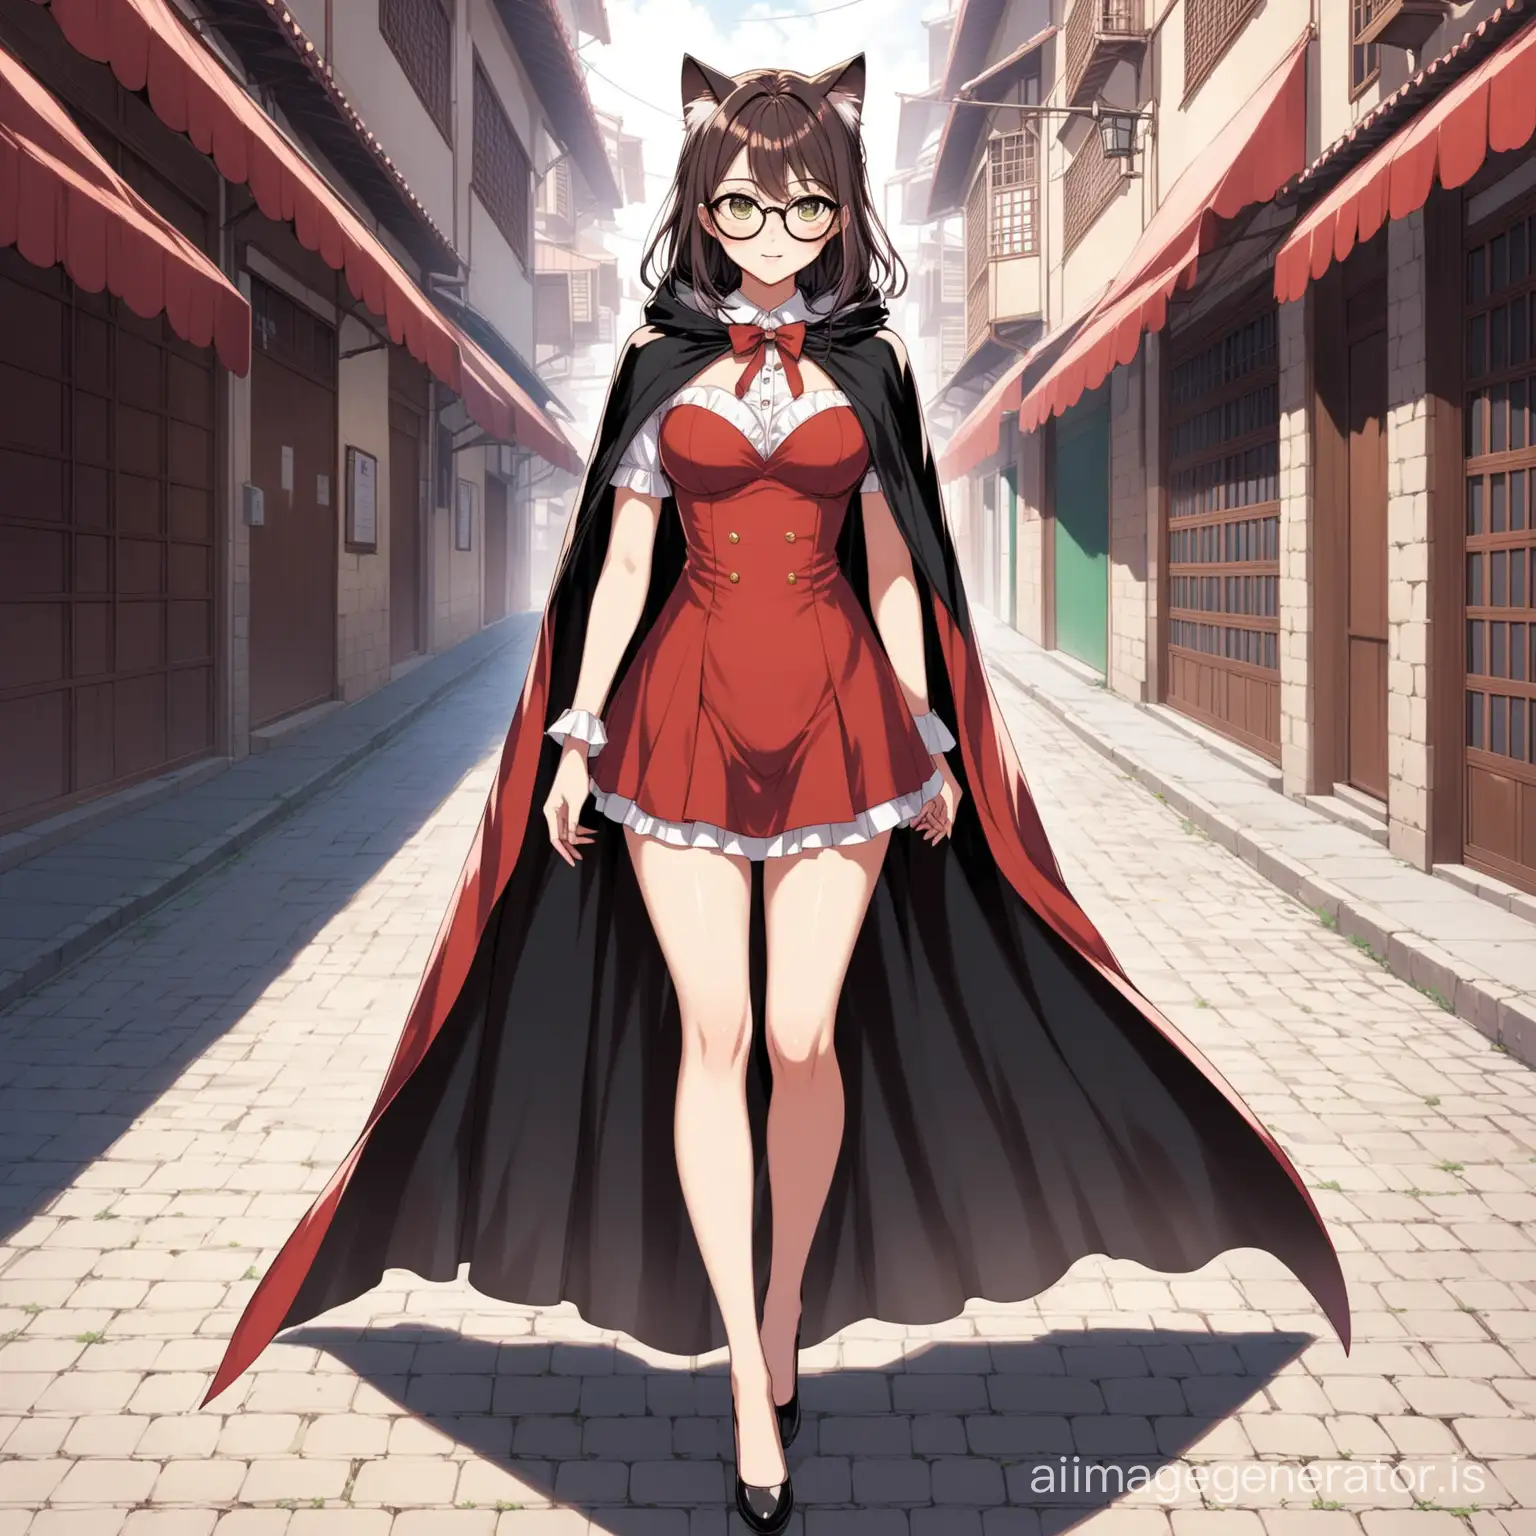 Stylish-Anime-Girl-in-Elegant-Dress-with-Cape-and-Cat-Eye-Glasses